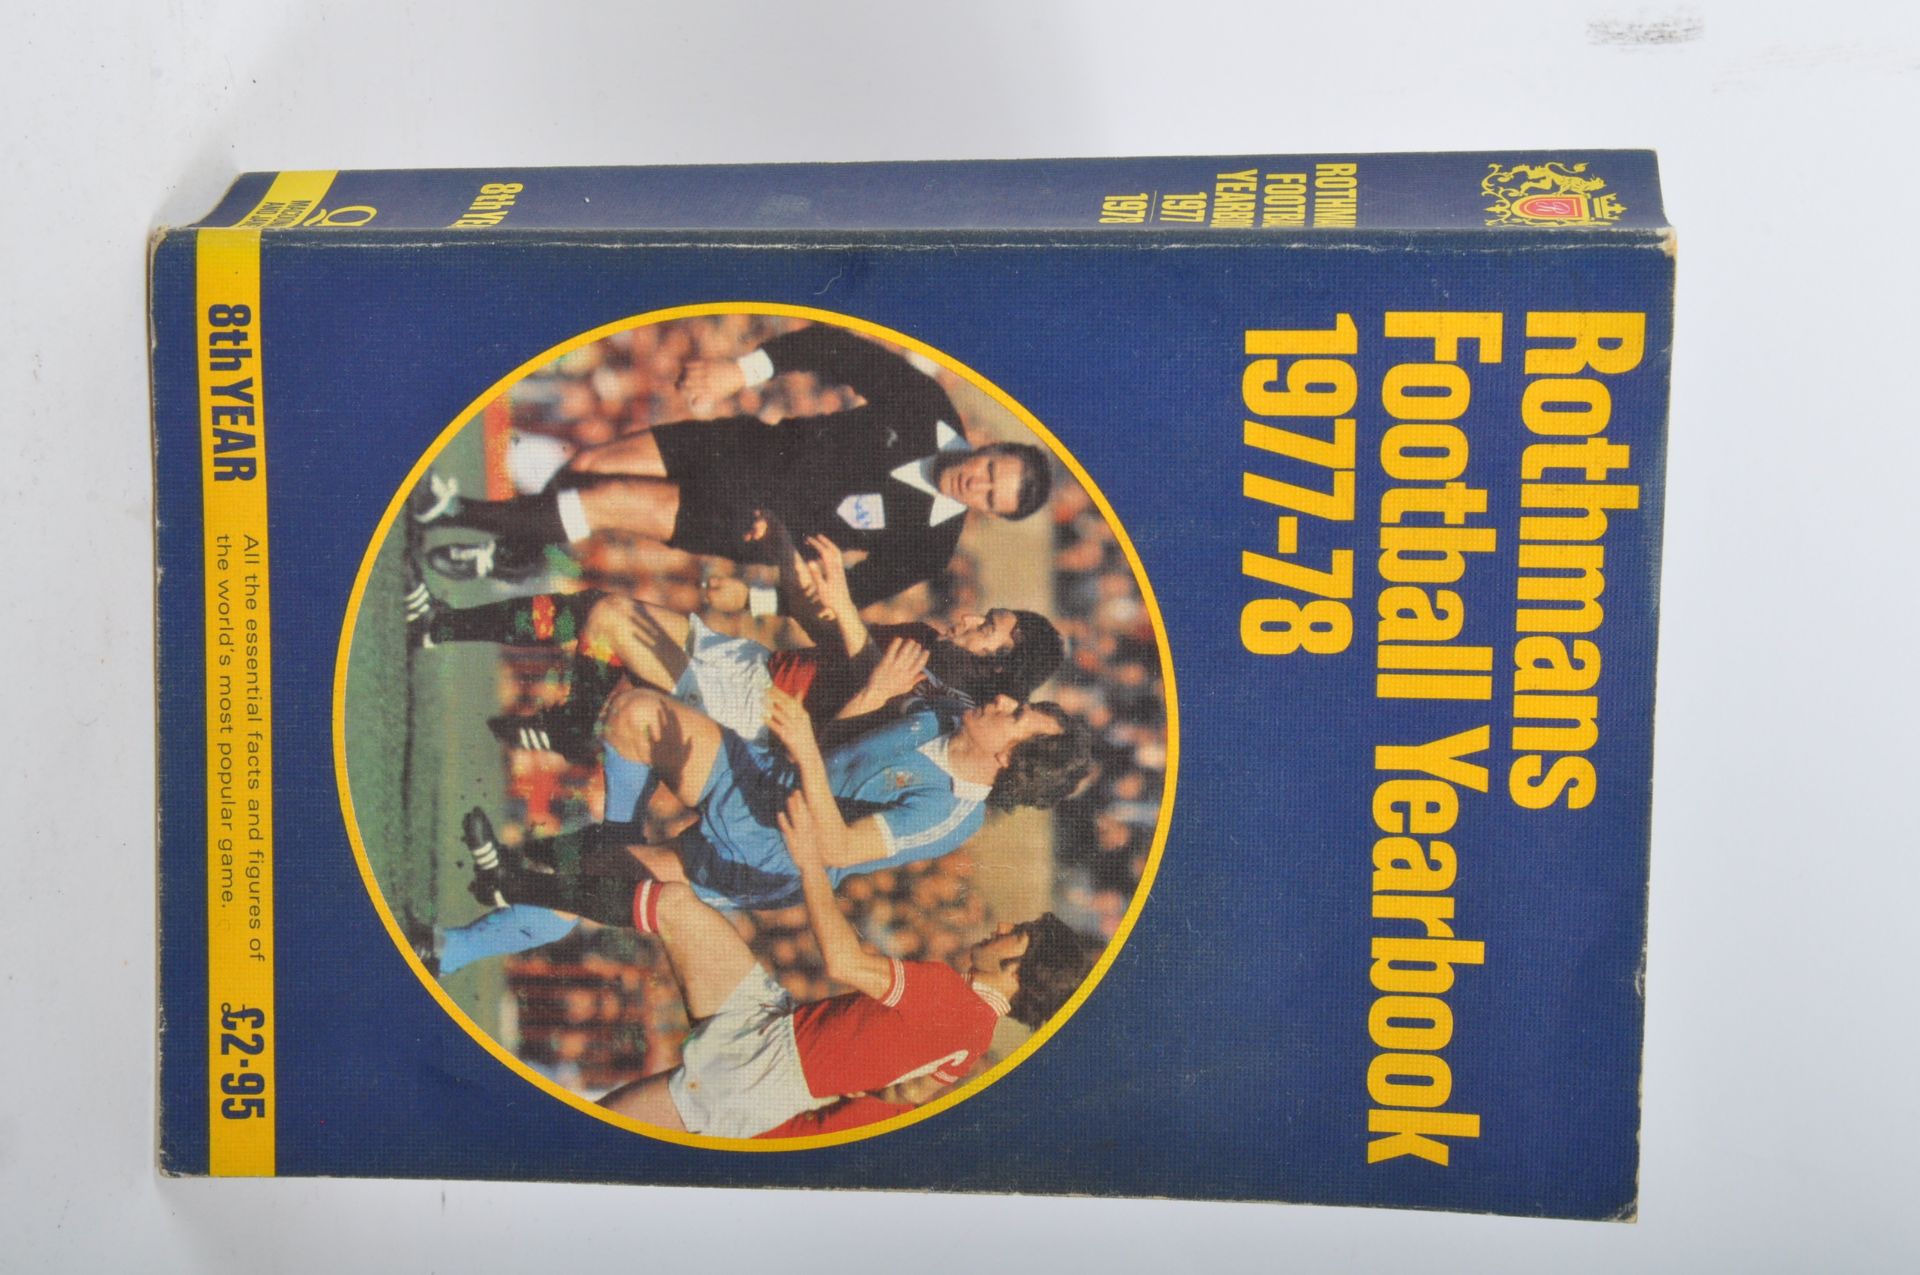 ROTHMANS FOOTBALL YEARBOOK - COLLECTION OF BOOKS - Image 5 of 8